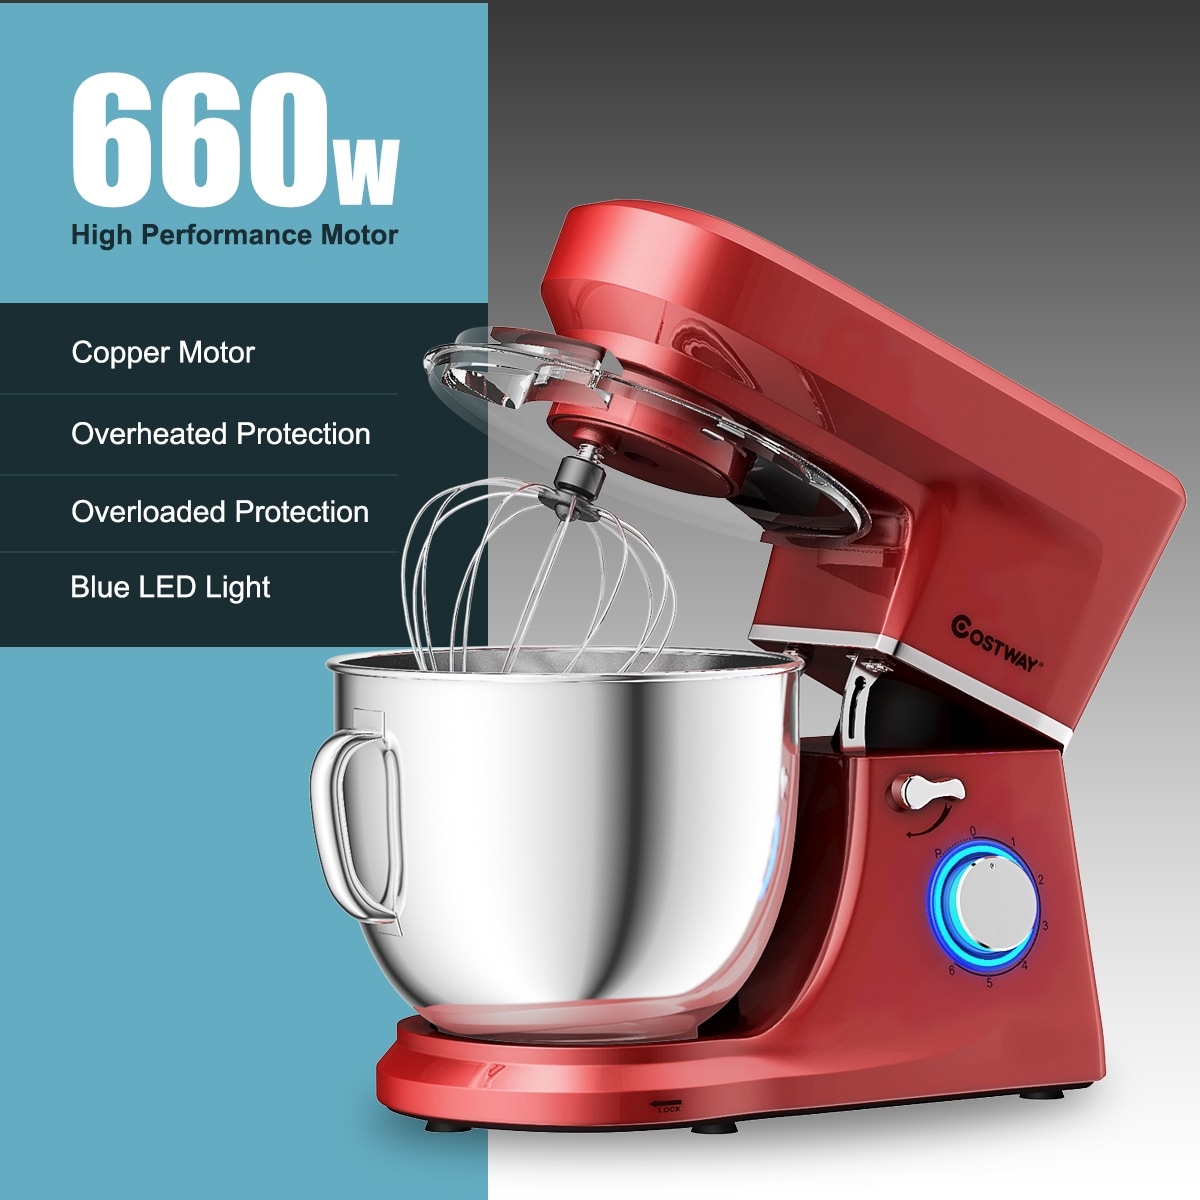 https://ak1.ostkcdn.com/images/products/is/images/direct/059e3cd1311dad567b670faf2863deece185c80c/Tilt-Head-Stand-Mixer-7.5-Qt-6-Speed-660W-with-Dough-Hook%2C-Whisk-%26.jpg